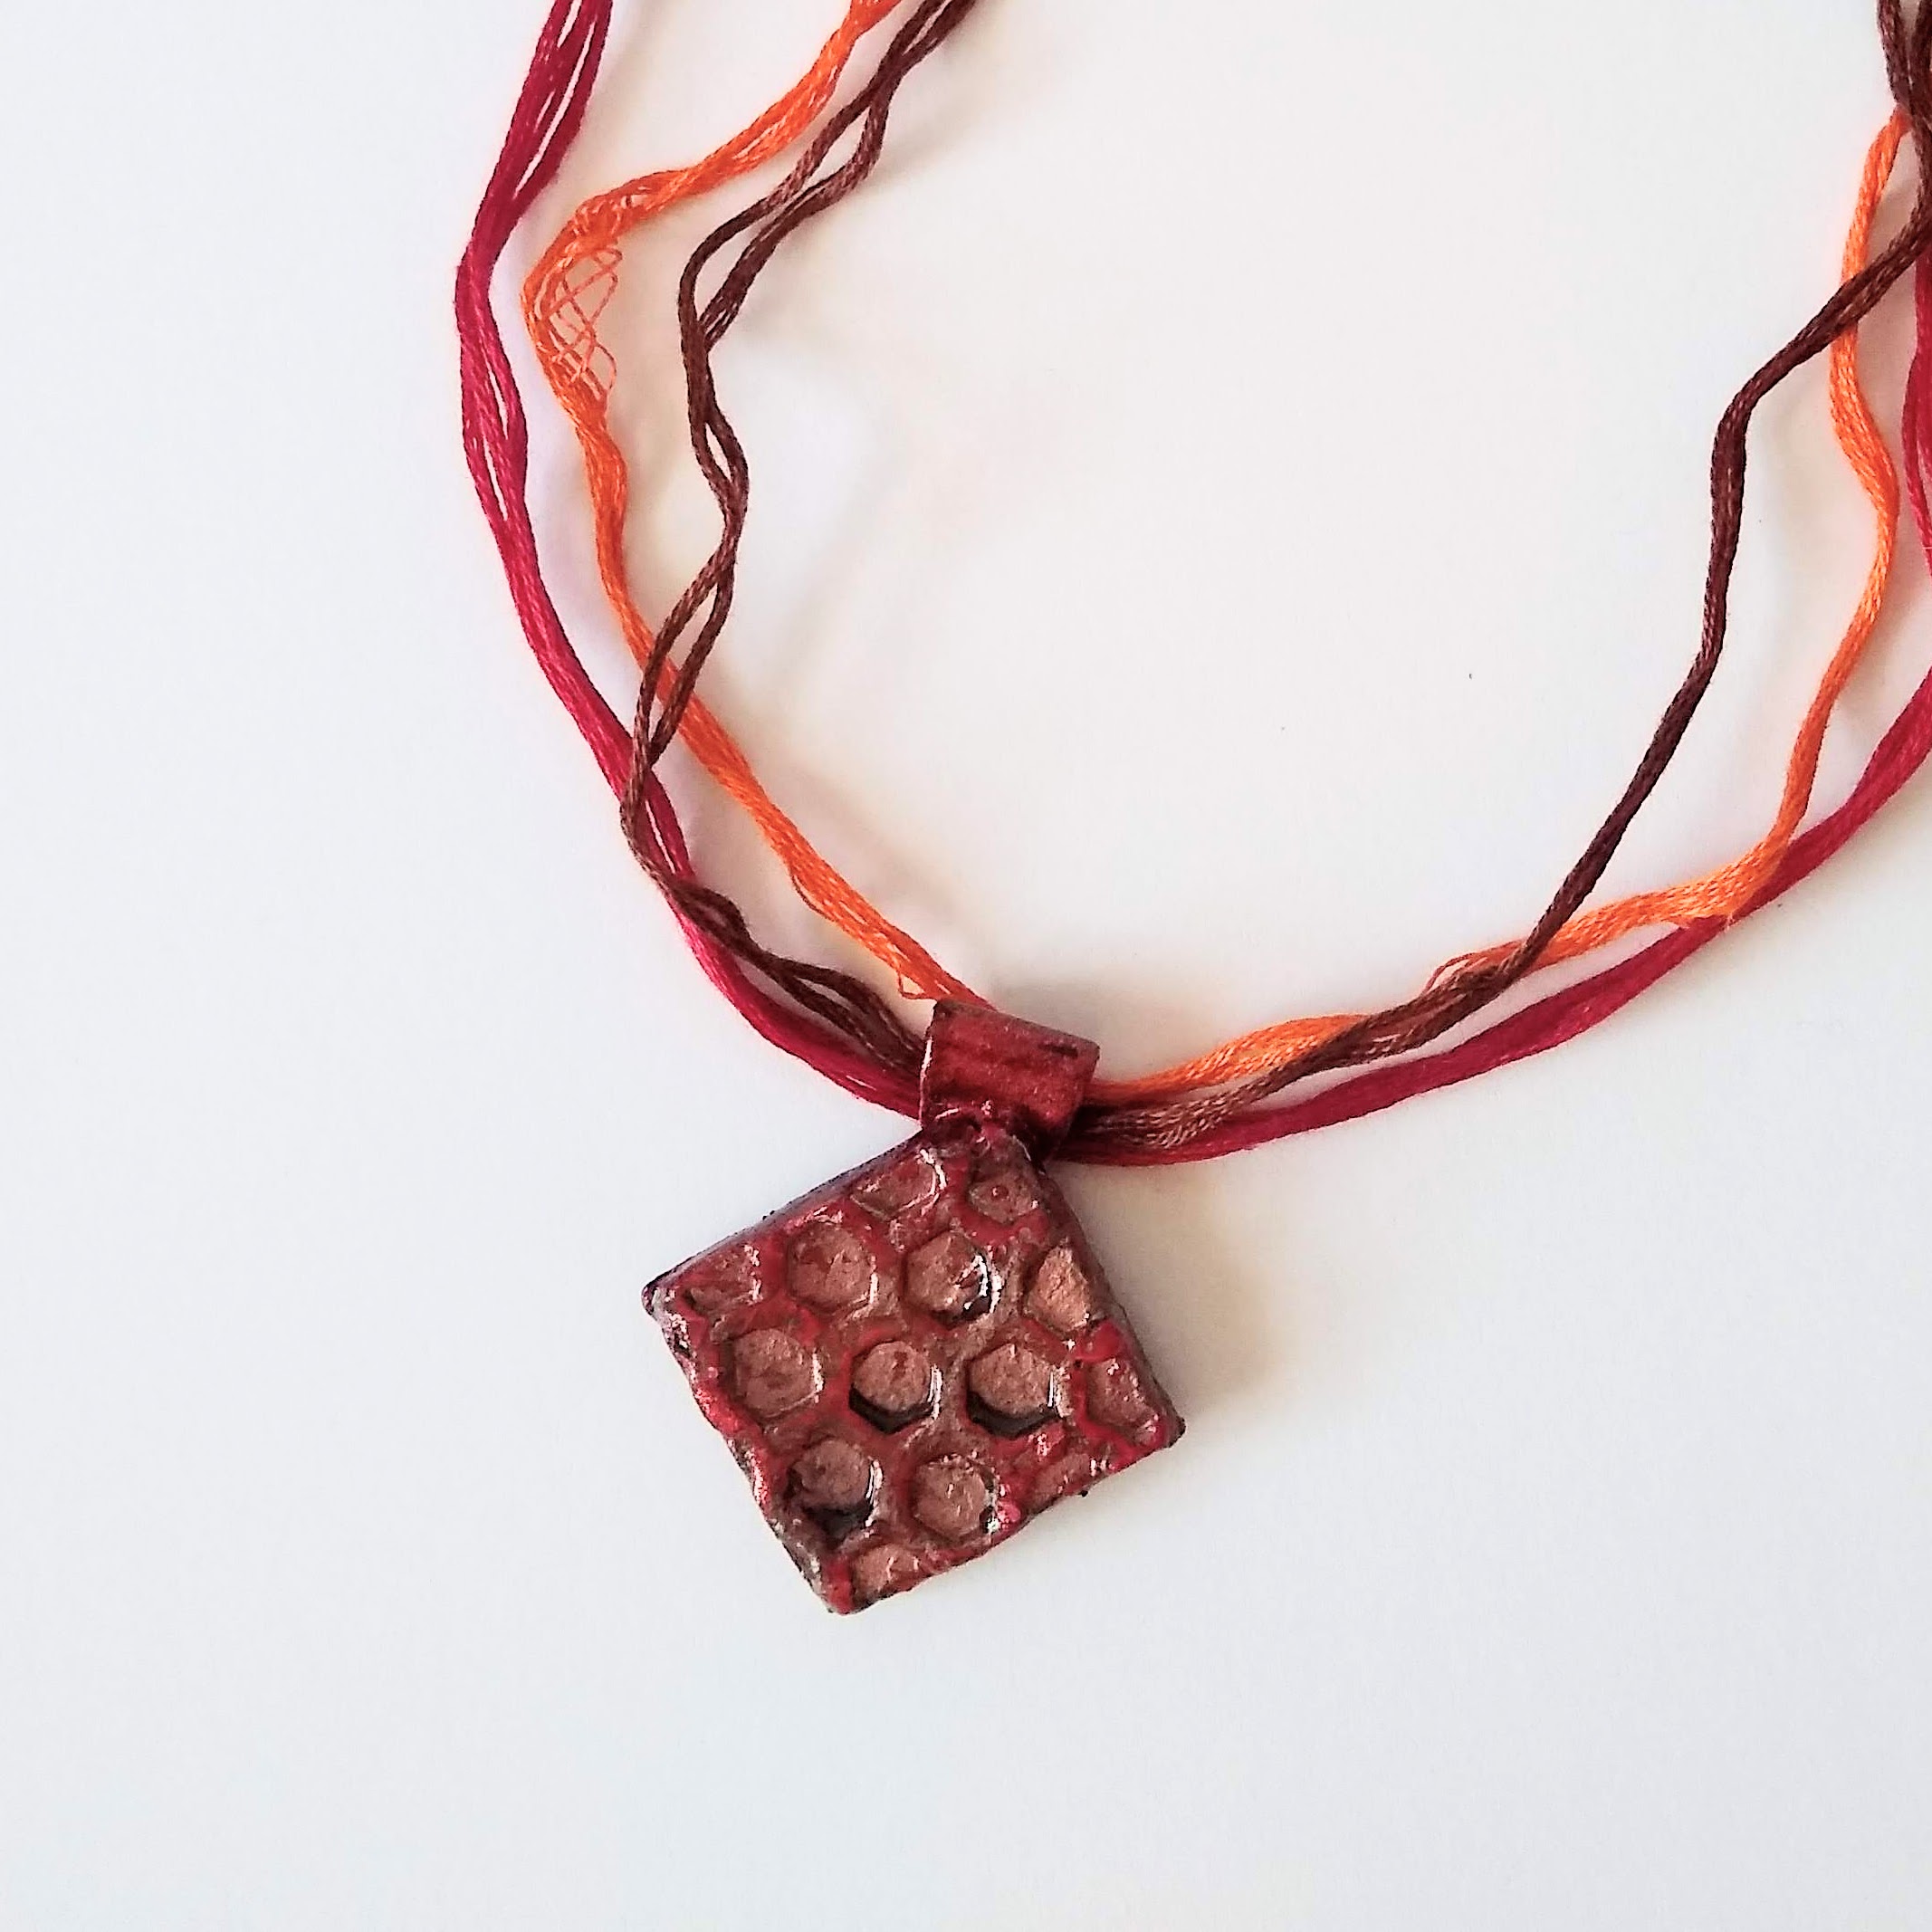 Diamond shape pendant with a honeycomb texture - bronze with deep red highlights - bail in the same material and colours